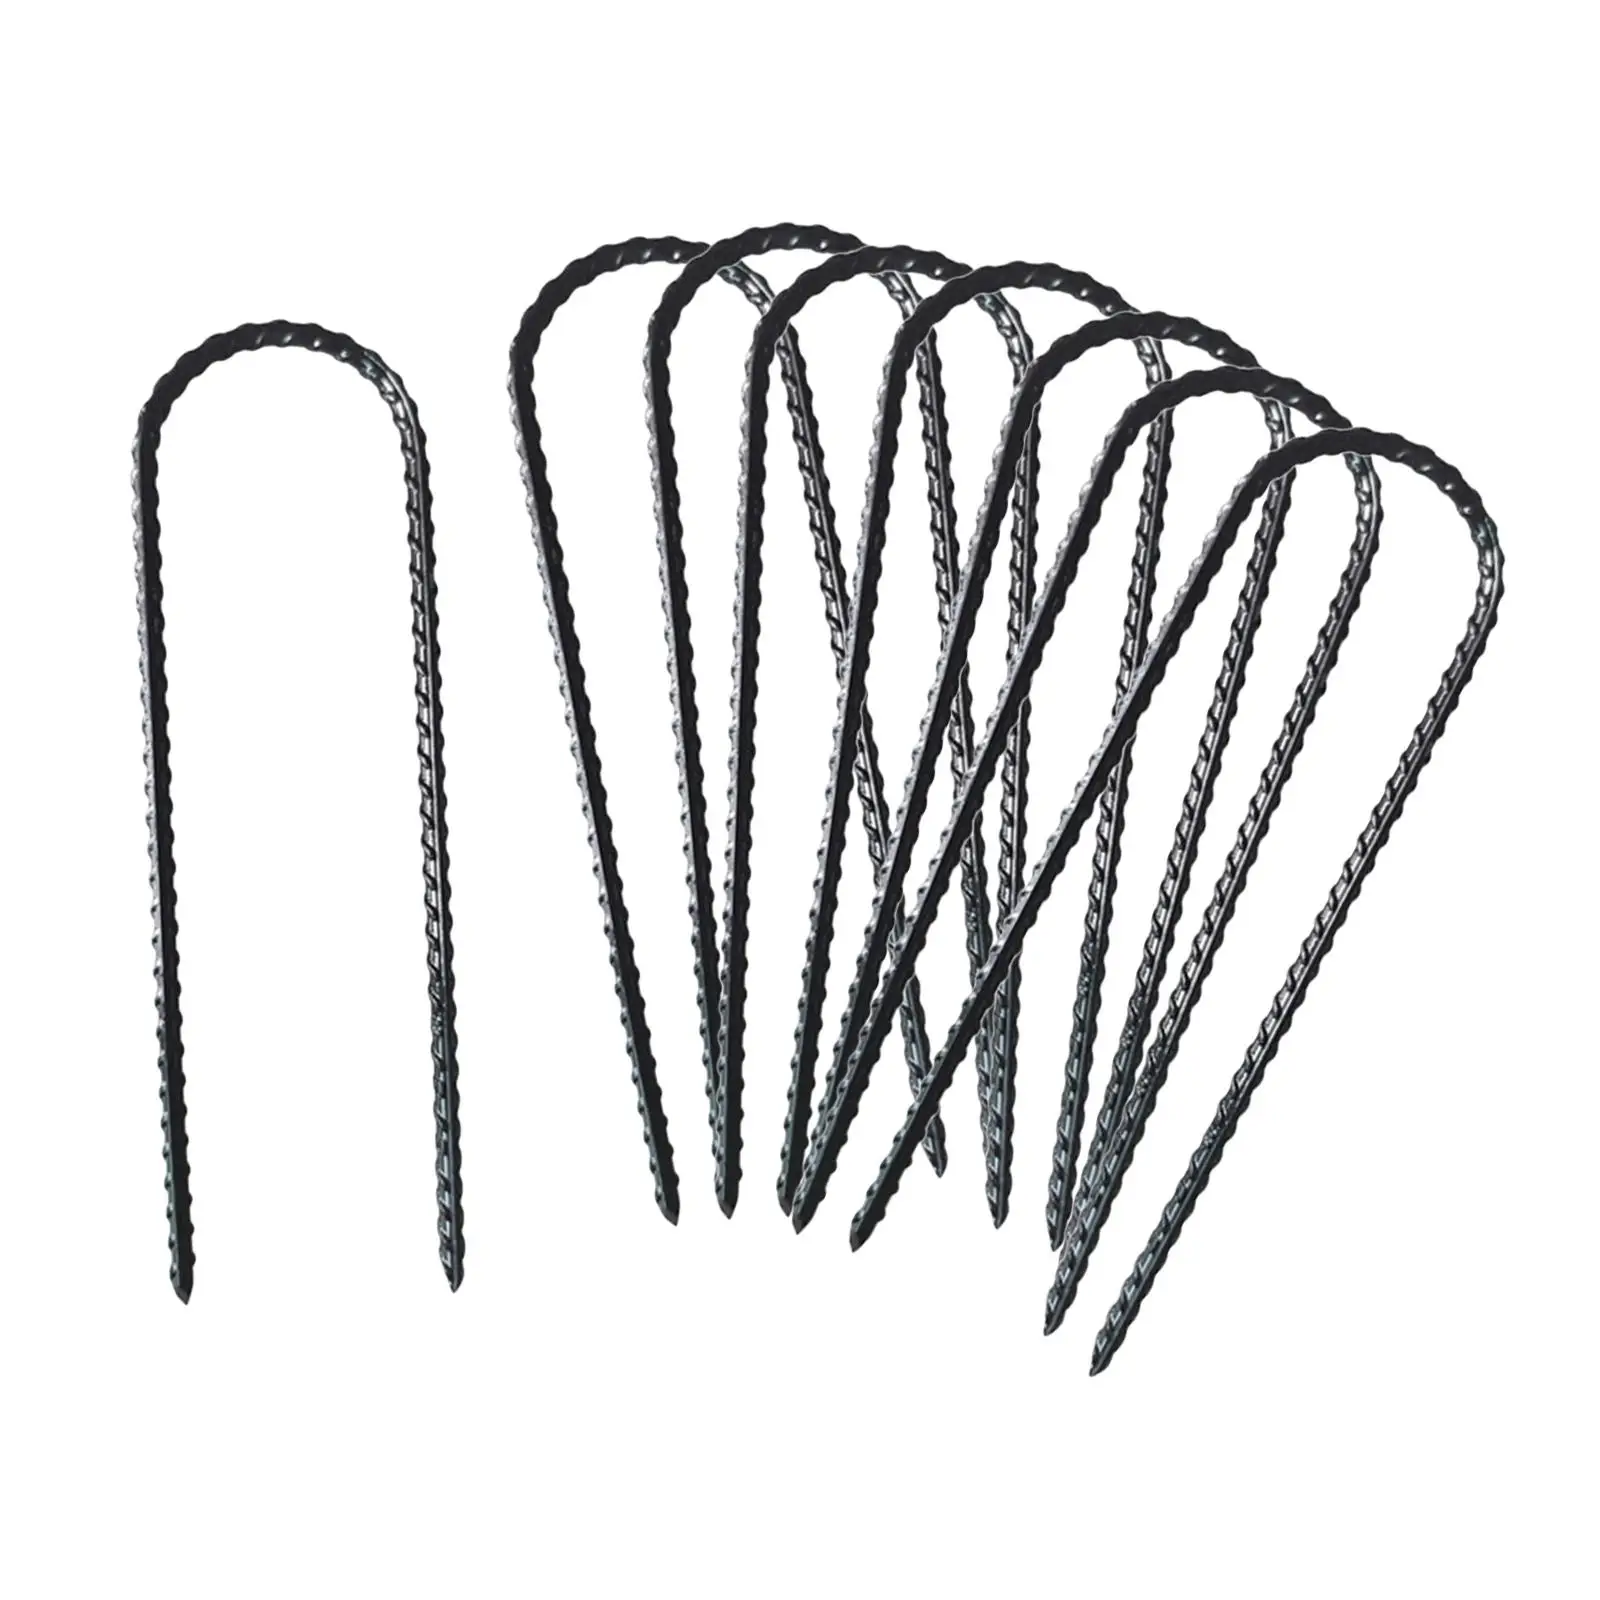 Trampoline Stakes Trampoline Stakes Anchors Trampoline Anchor Trampoline